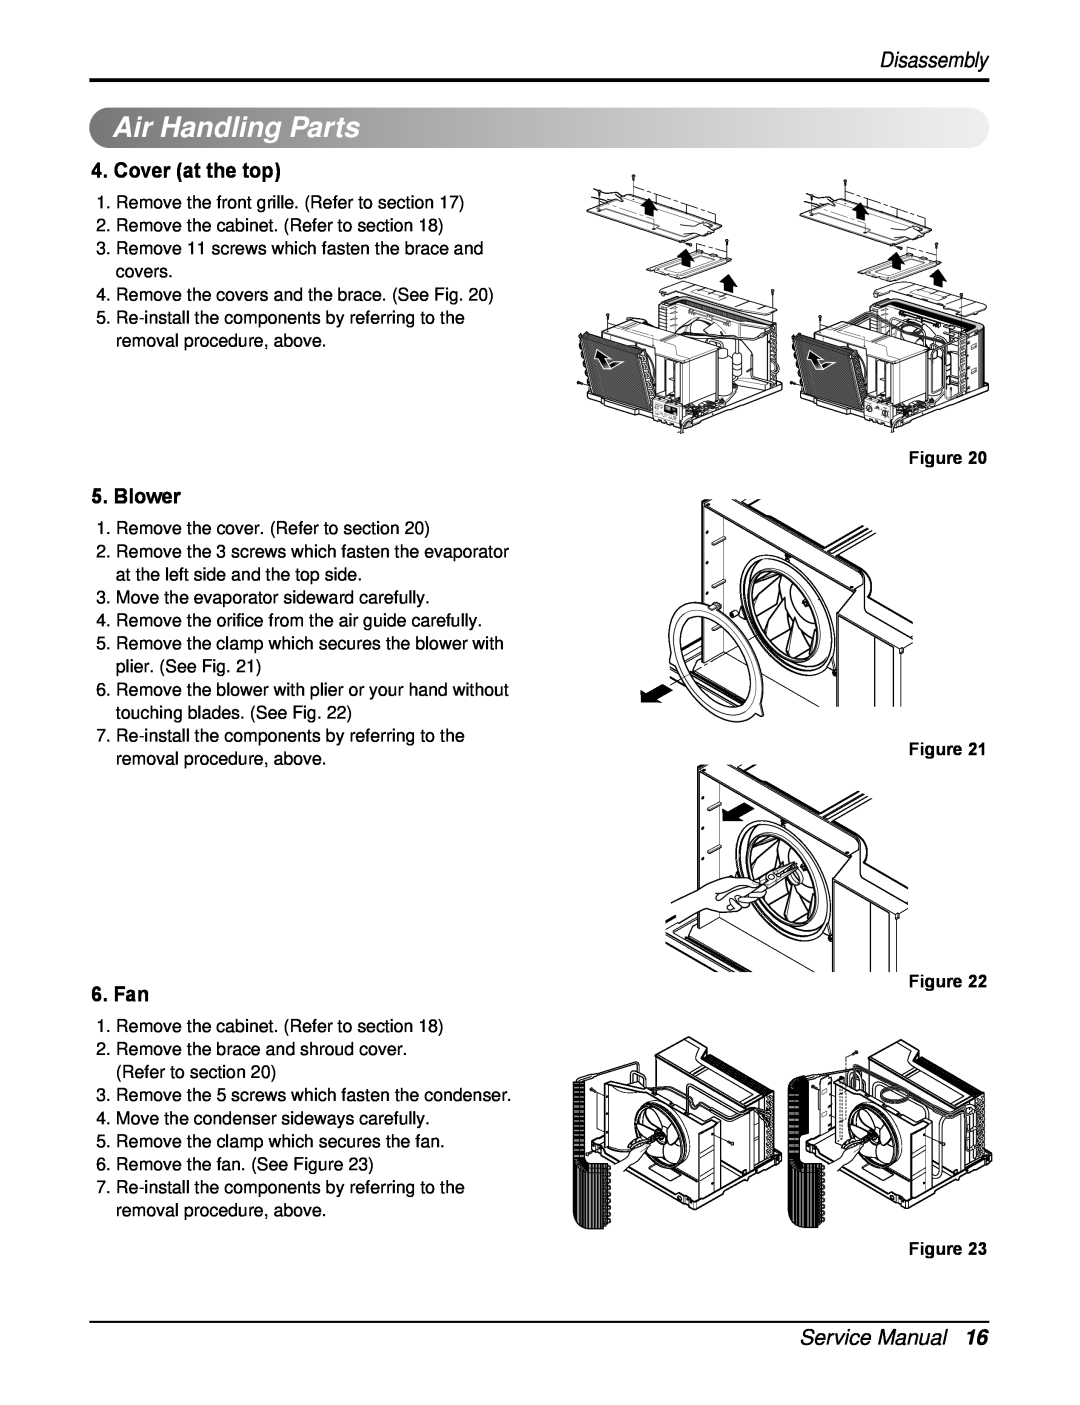 Heat Controller RAD-243A Air HandlingParts, Cover at the top, Blower, 6.Fan, Disassembly, Figure Figure Figure Figure 